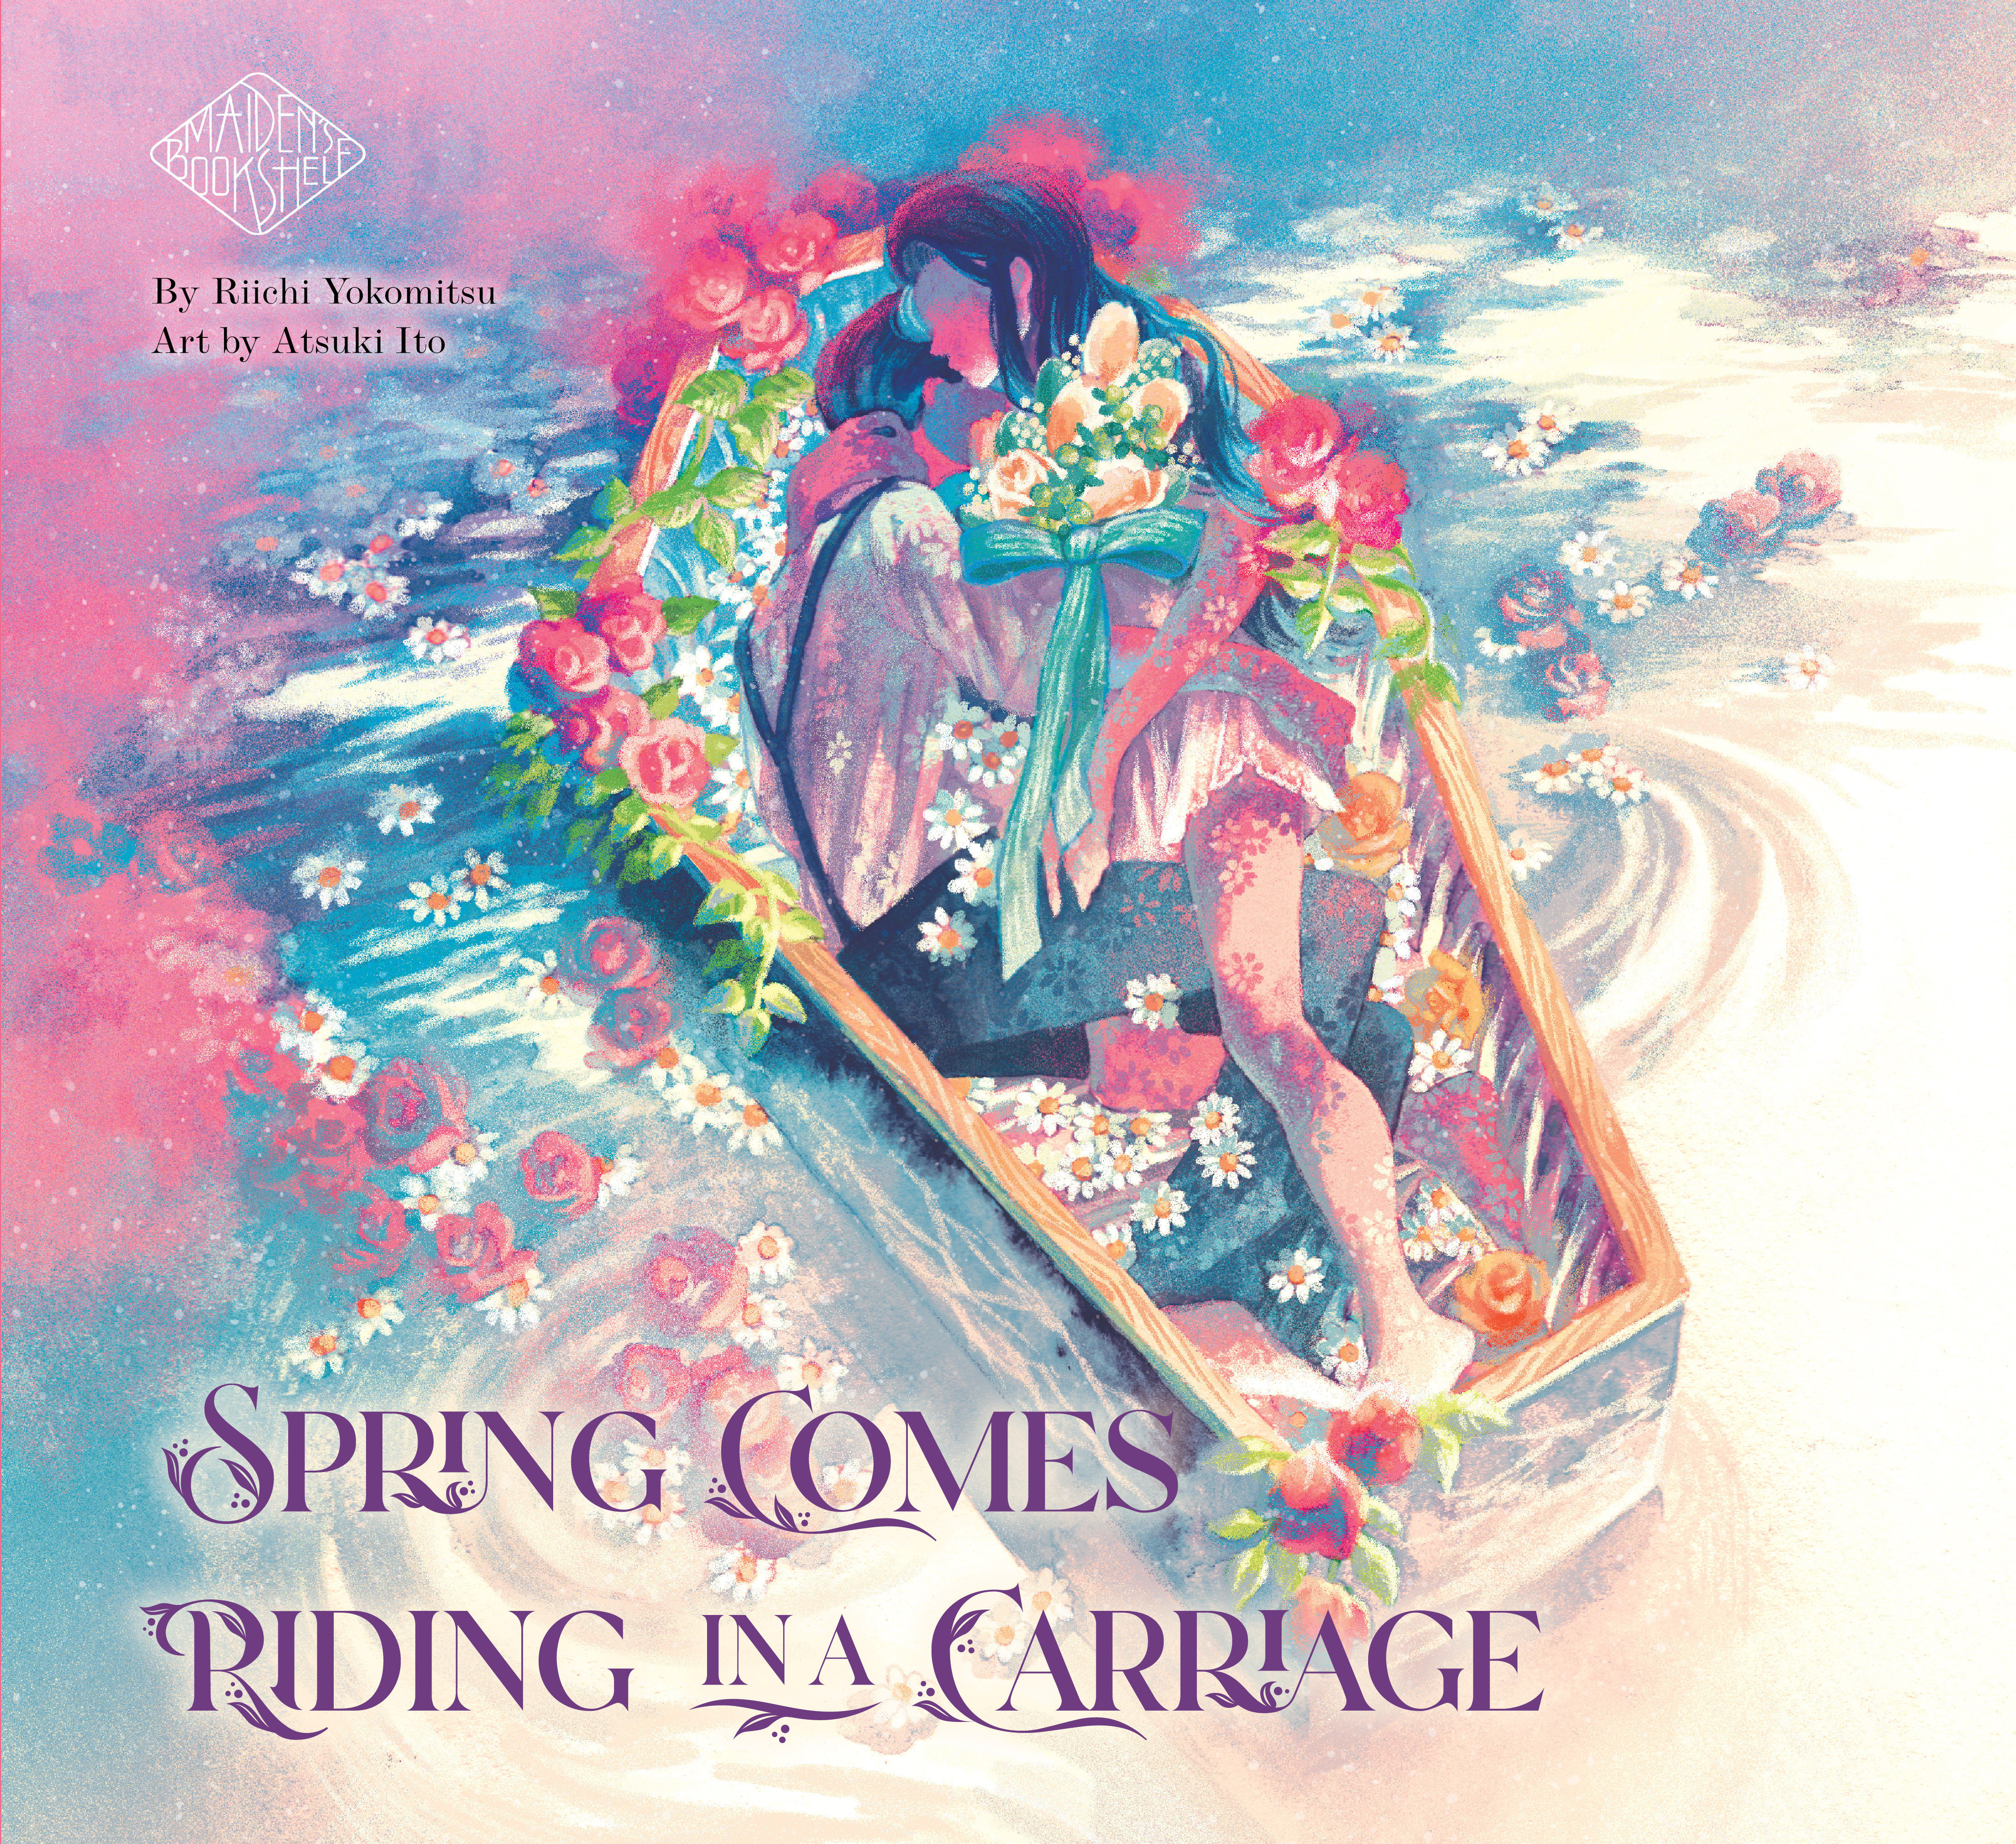 Spring Comes Riding In A Carriage Manga